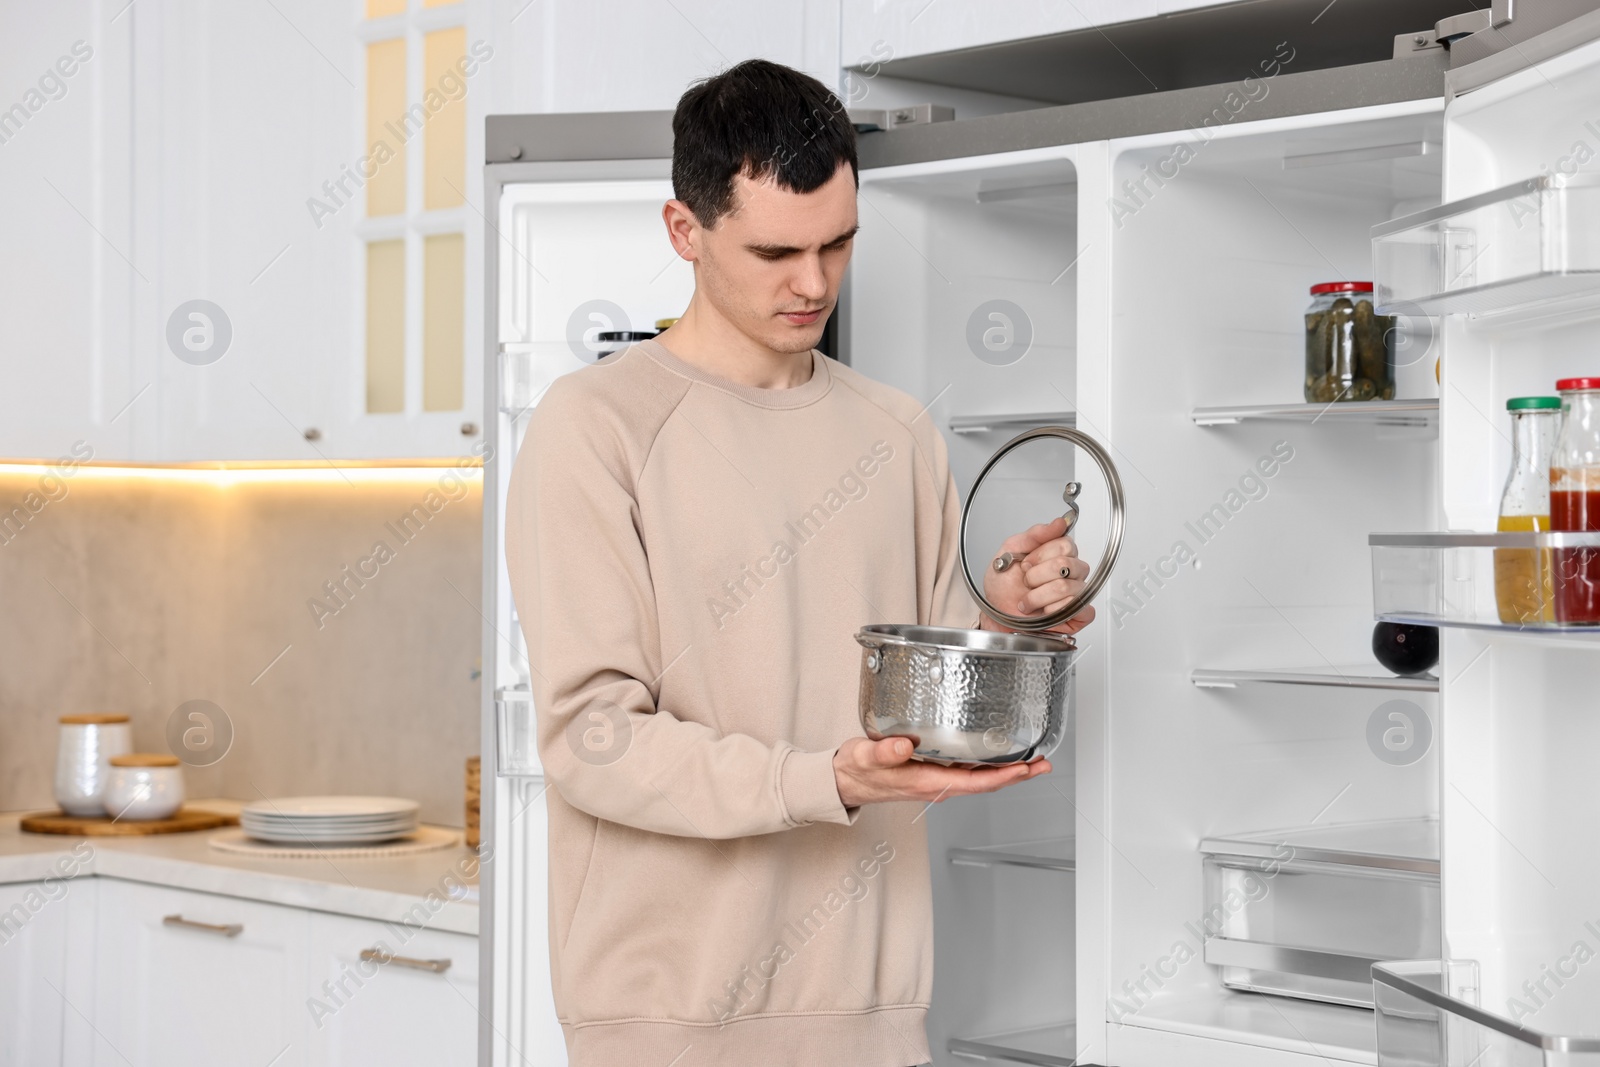 Photo of Upset man with pot near empty refrigerator in kitchen